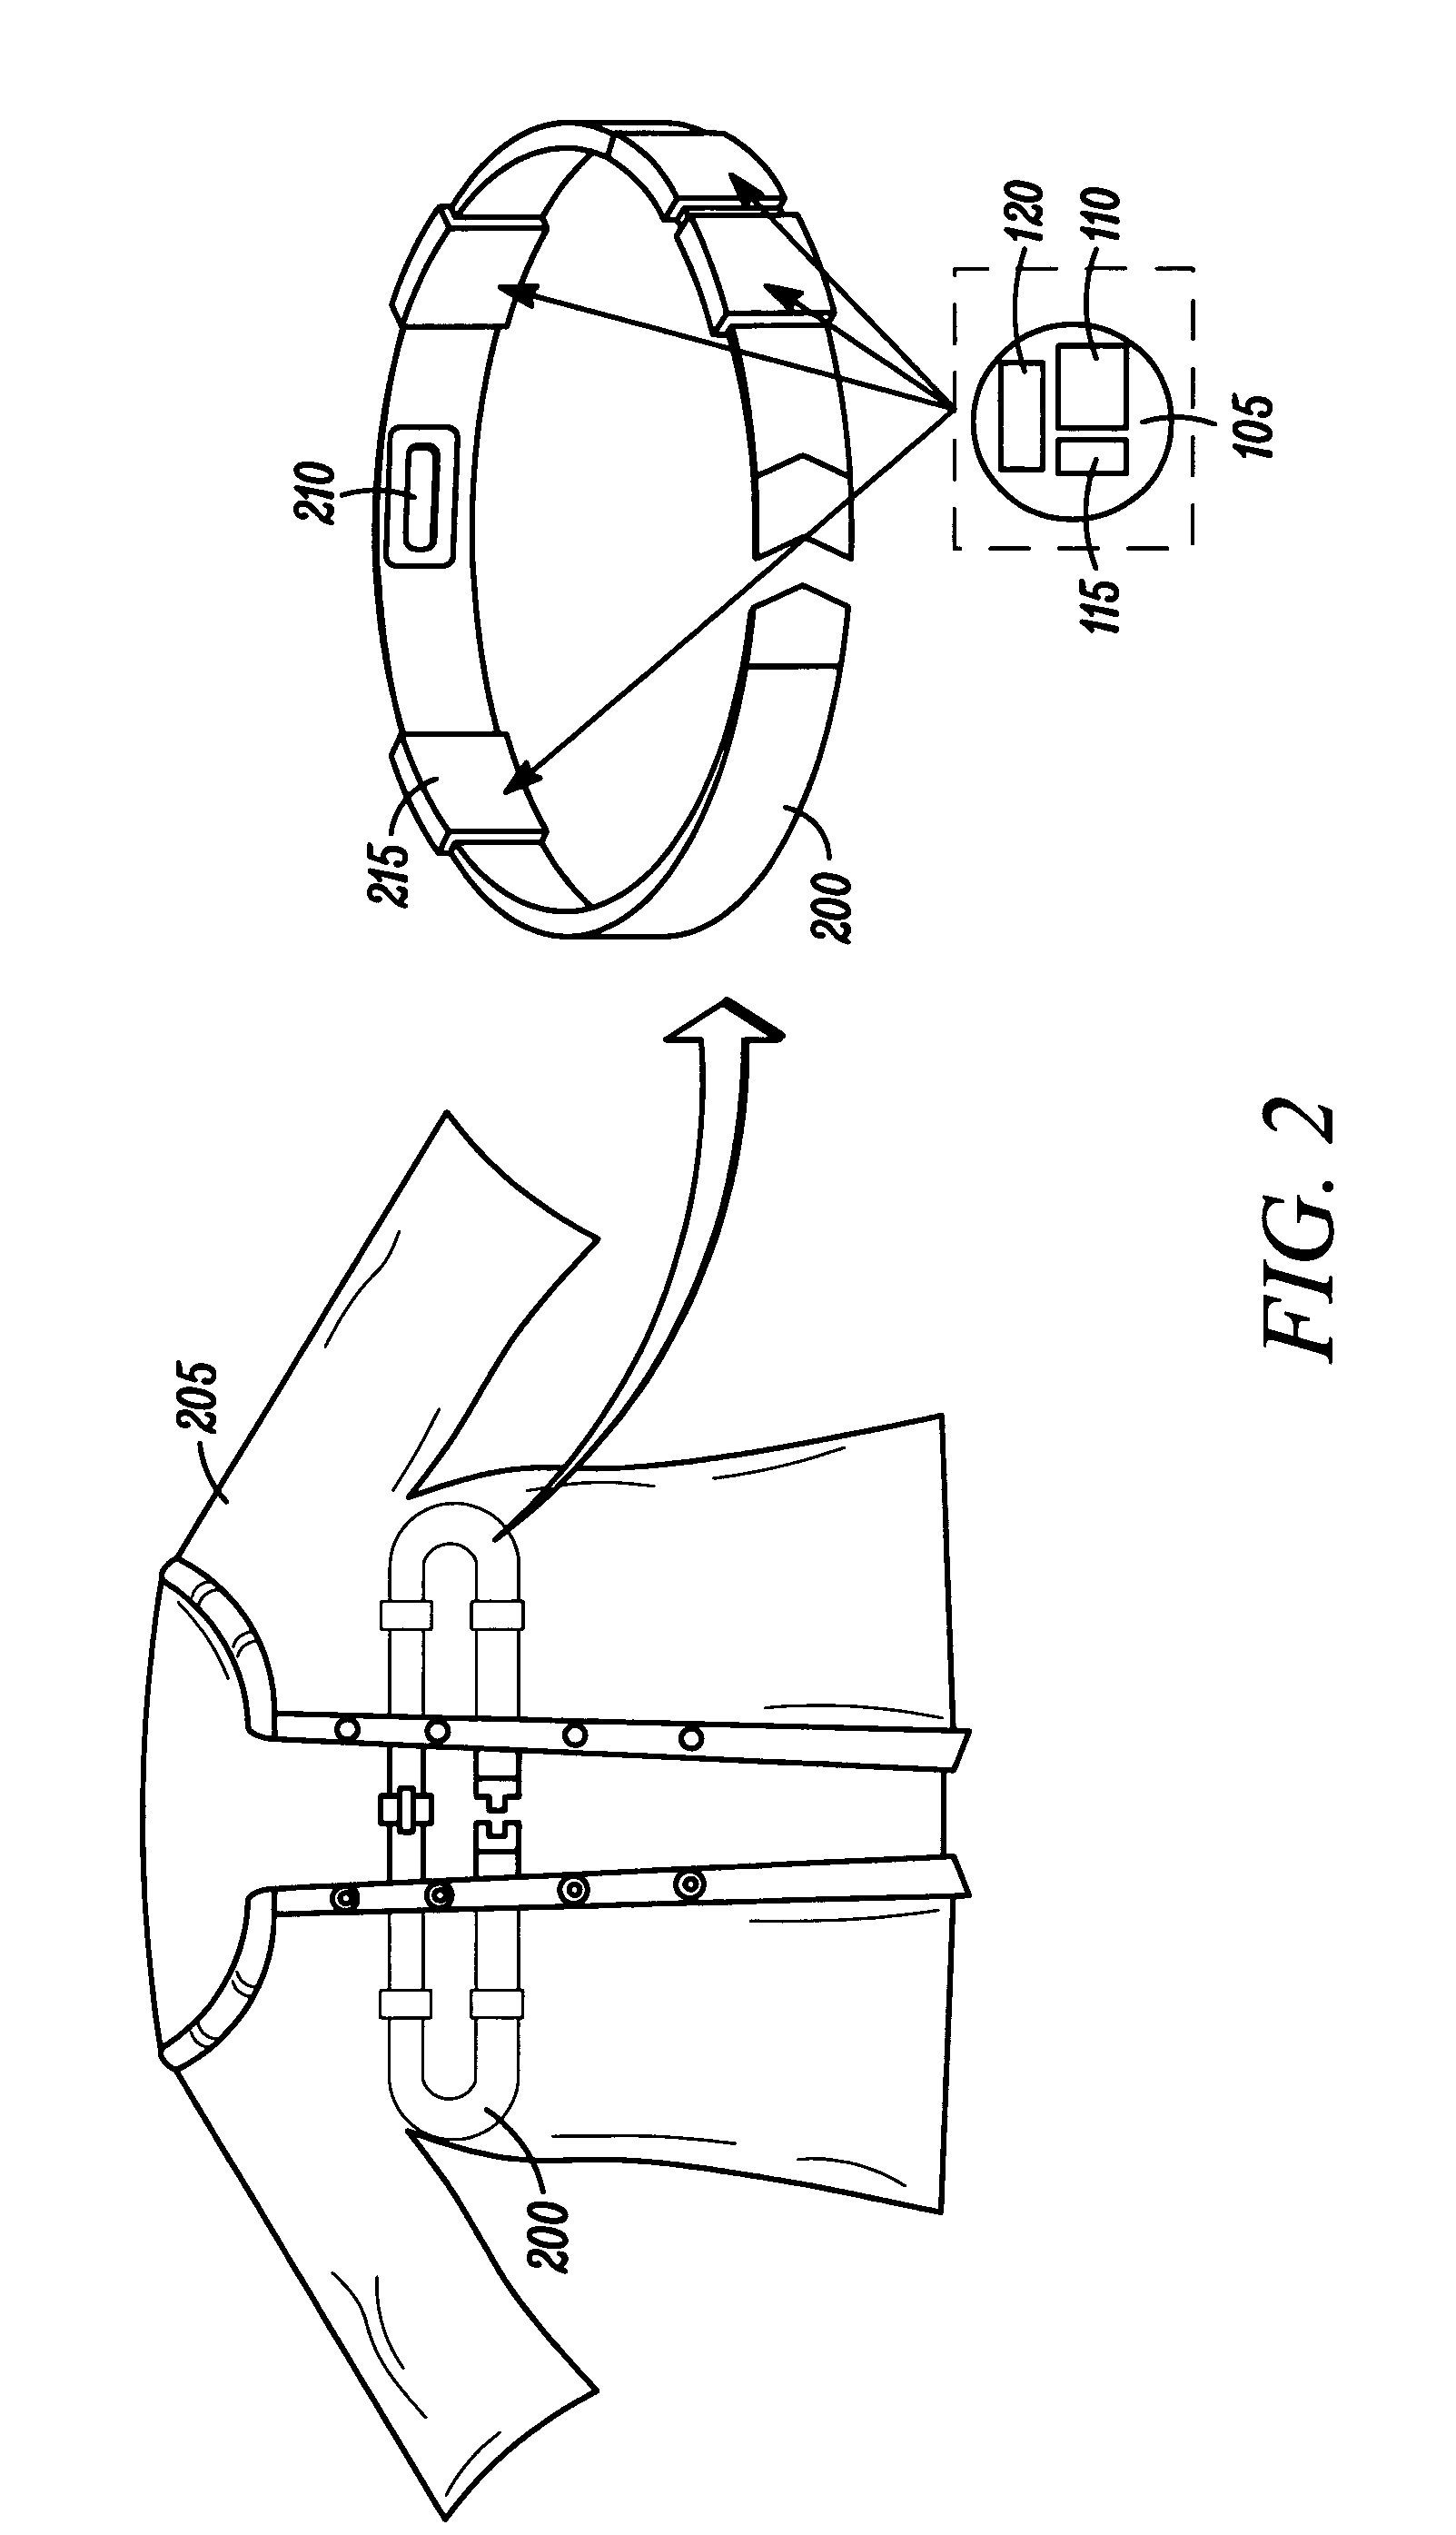 Wearable auscultation system and method